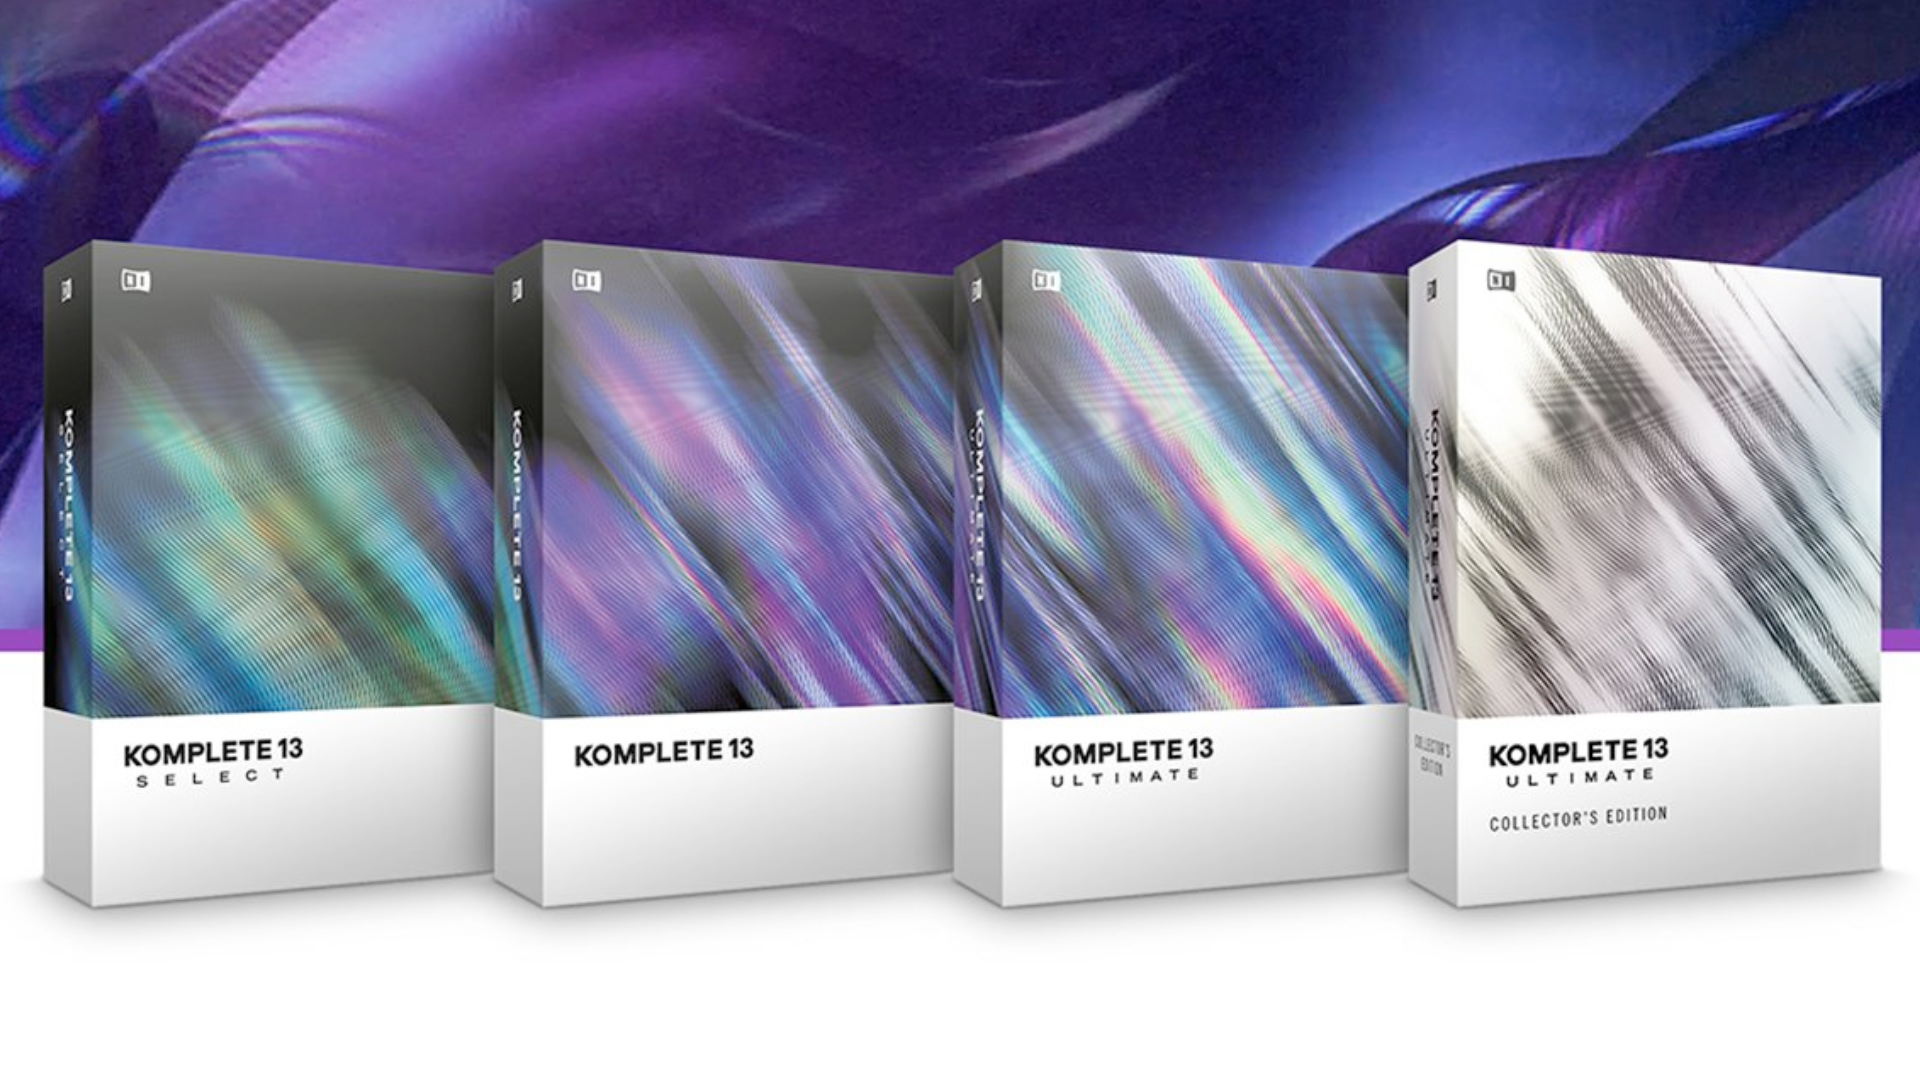 Save Up To 50% On Native Instruments' Komplete 13 Software, 60% OFF